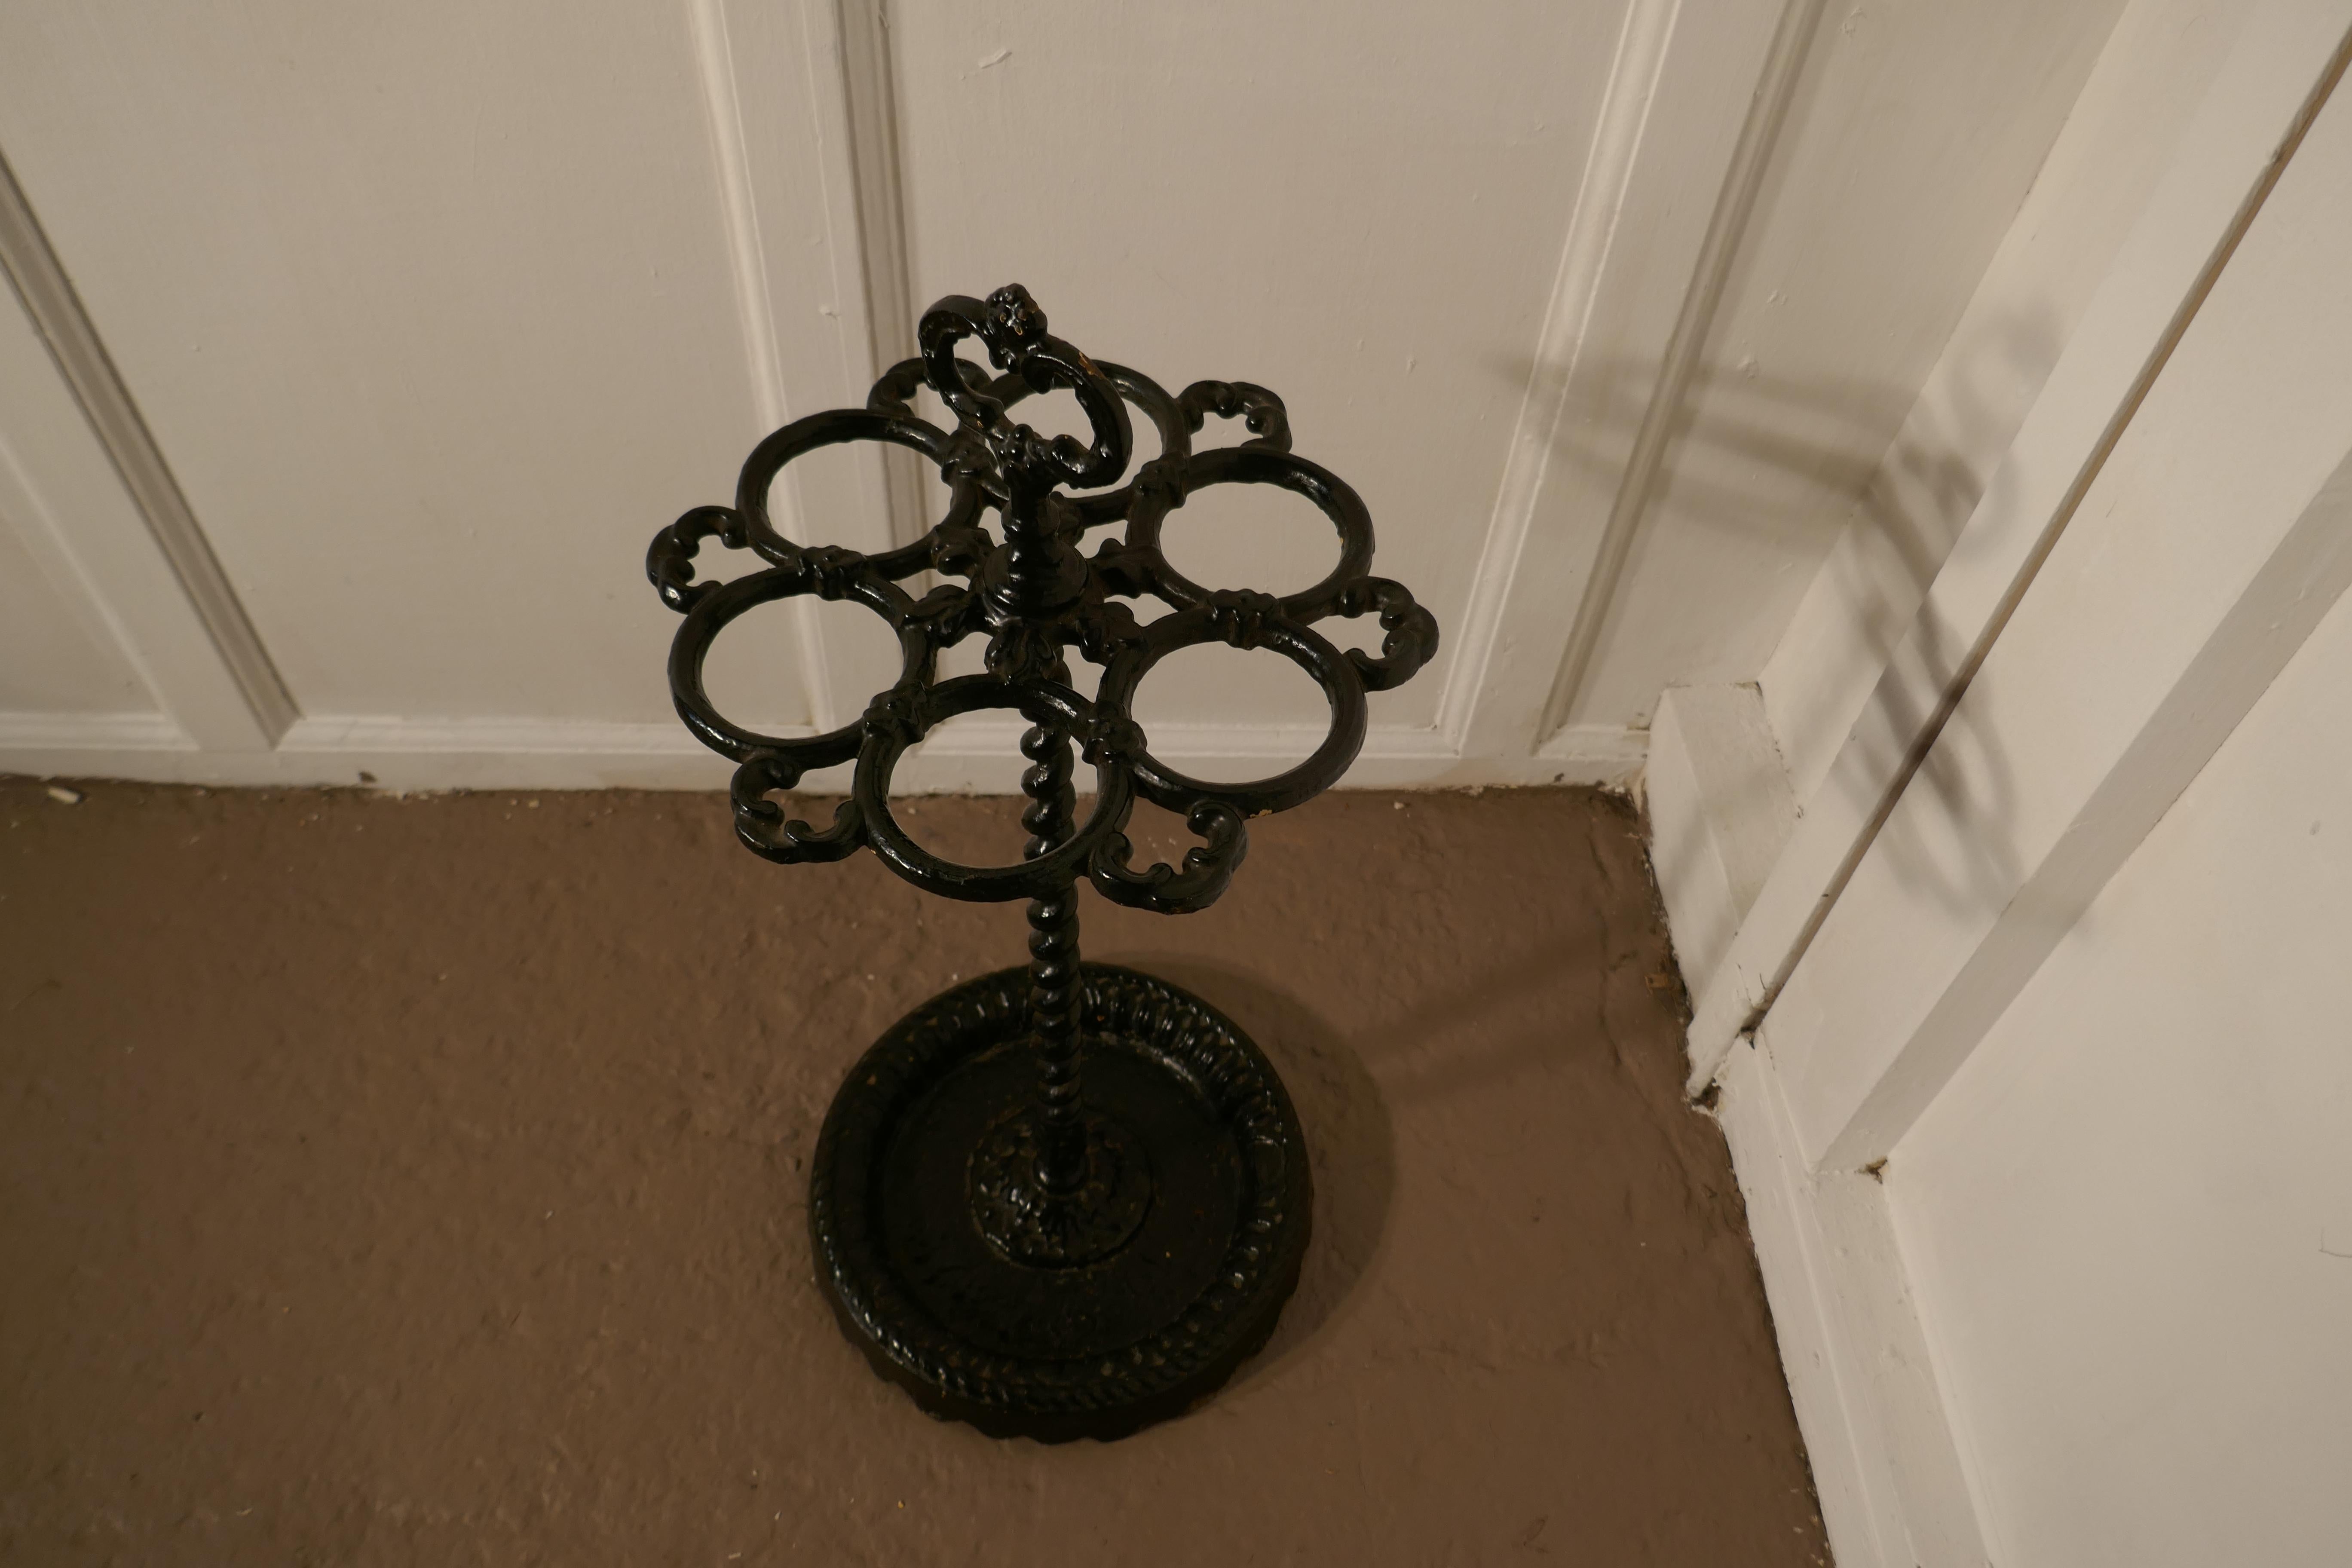 A French cast iron walking stick stand or umbrella stand

A charming piece, the round stand is divided into 6 sections to hold either walking sticks or umbrellas, the heavy iron base is also the drip tray and it has a handle on the top
The stand